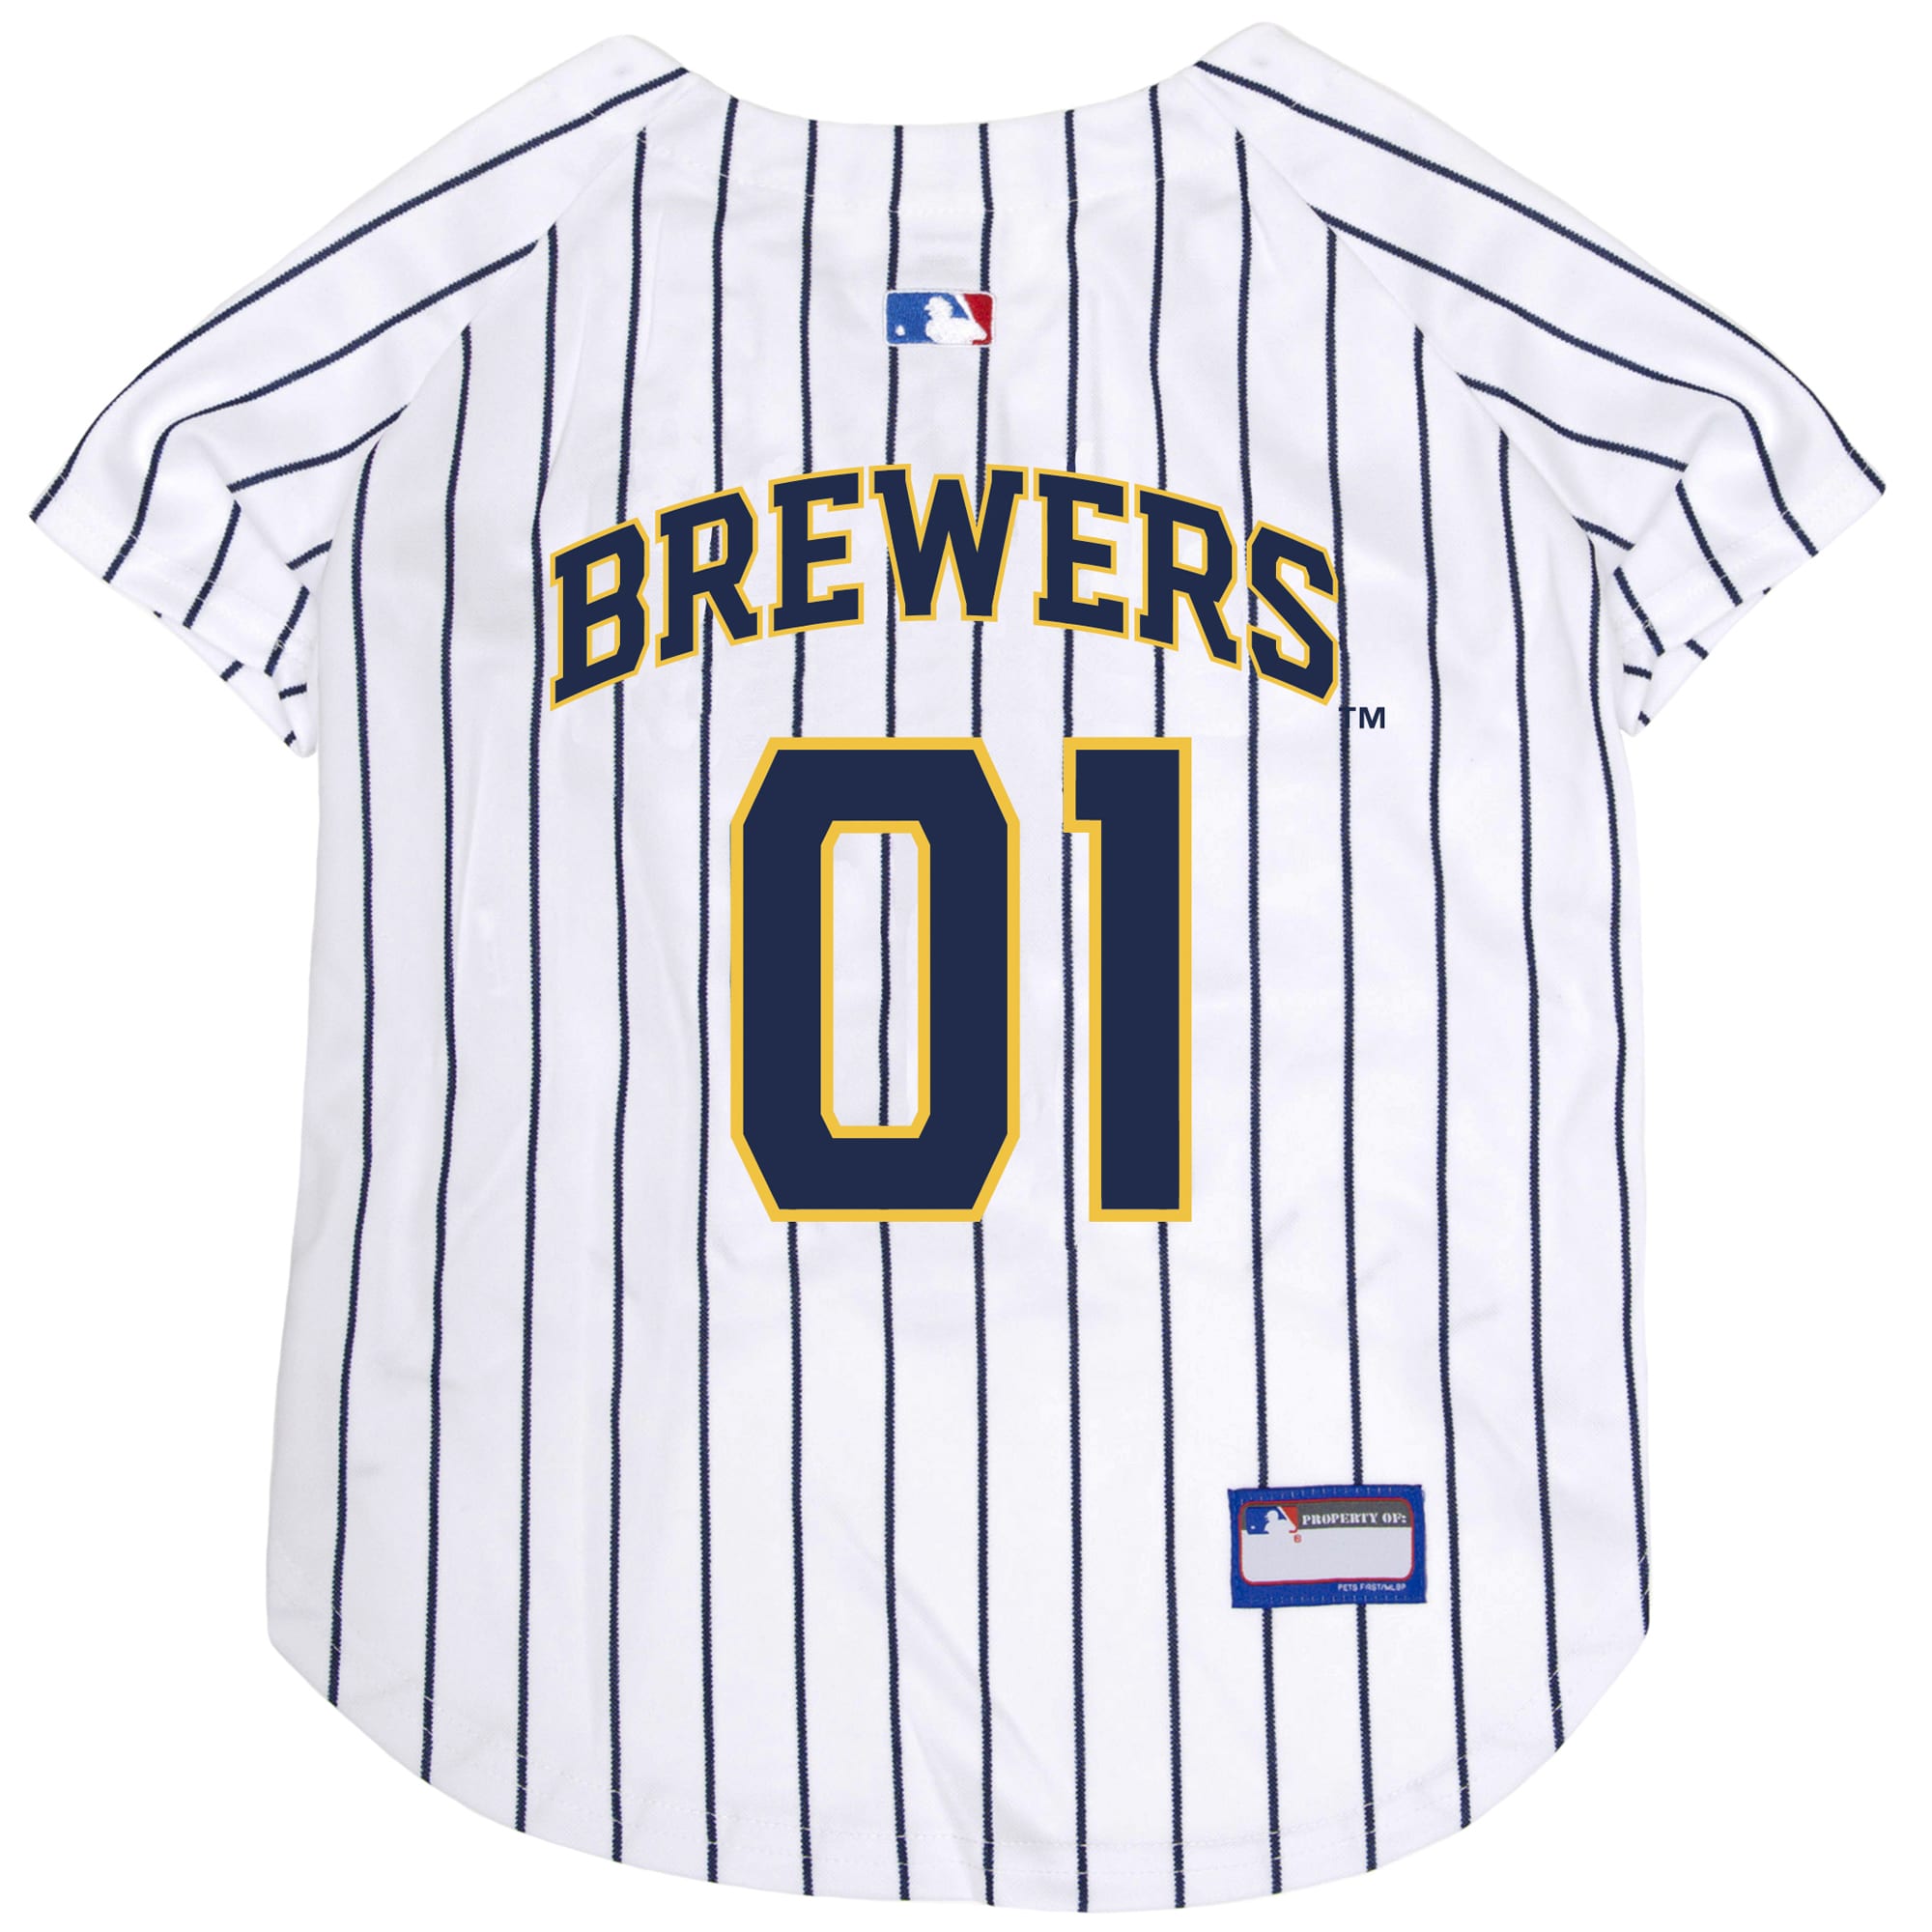 brewers dog jersey